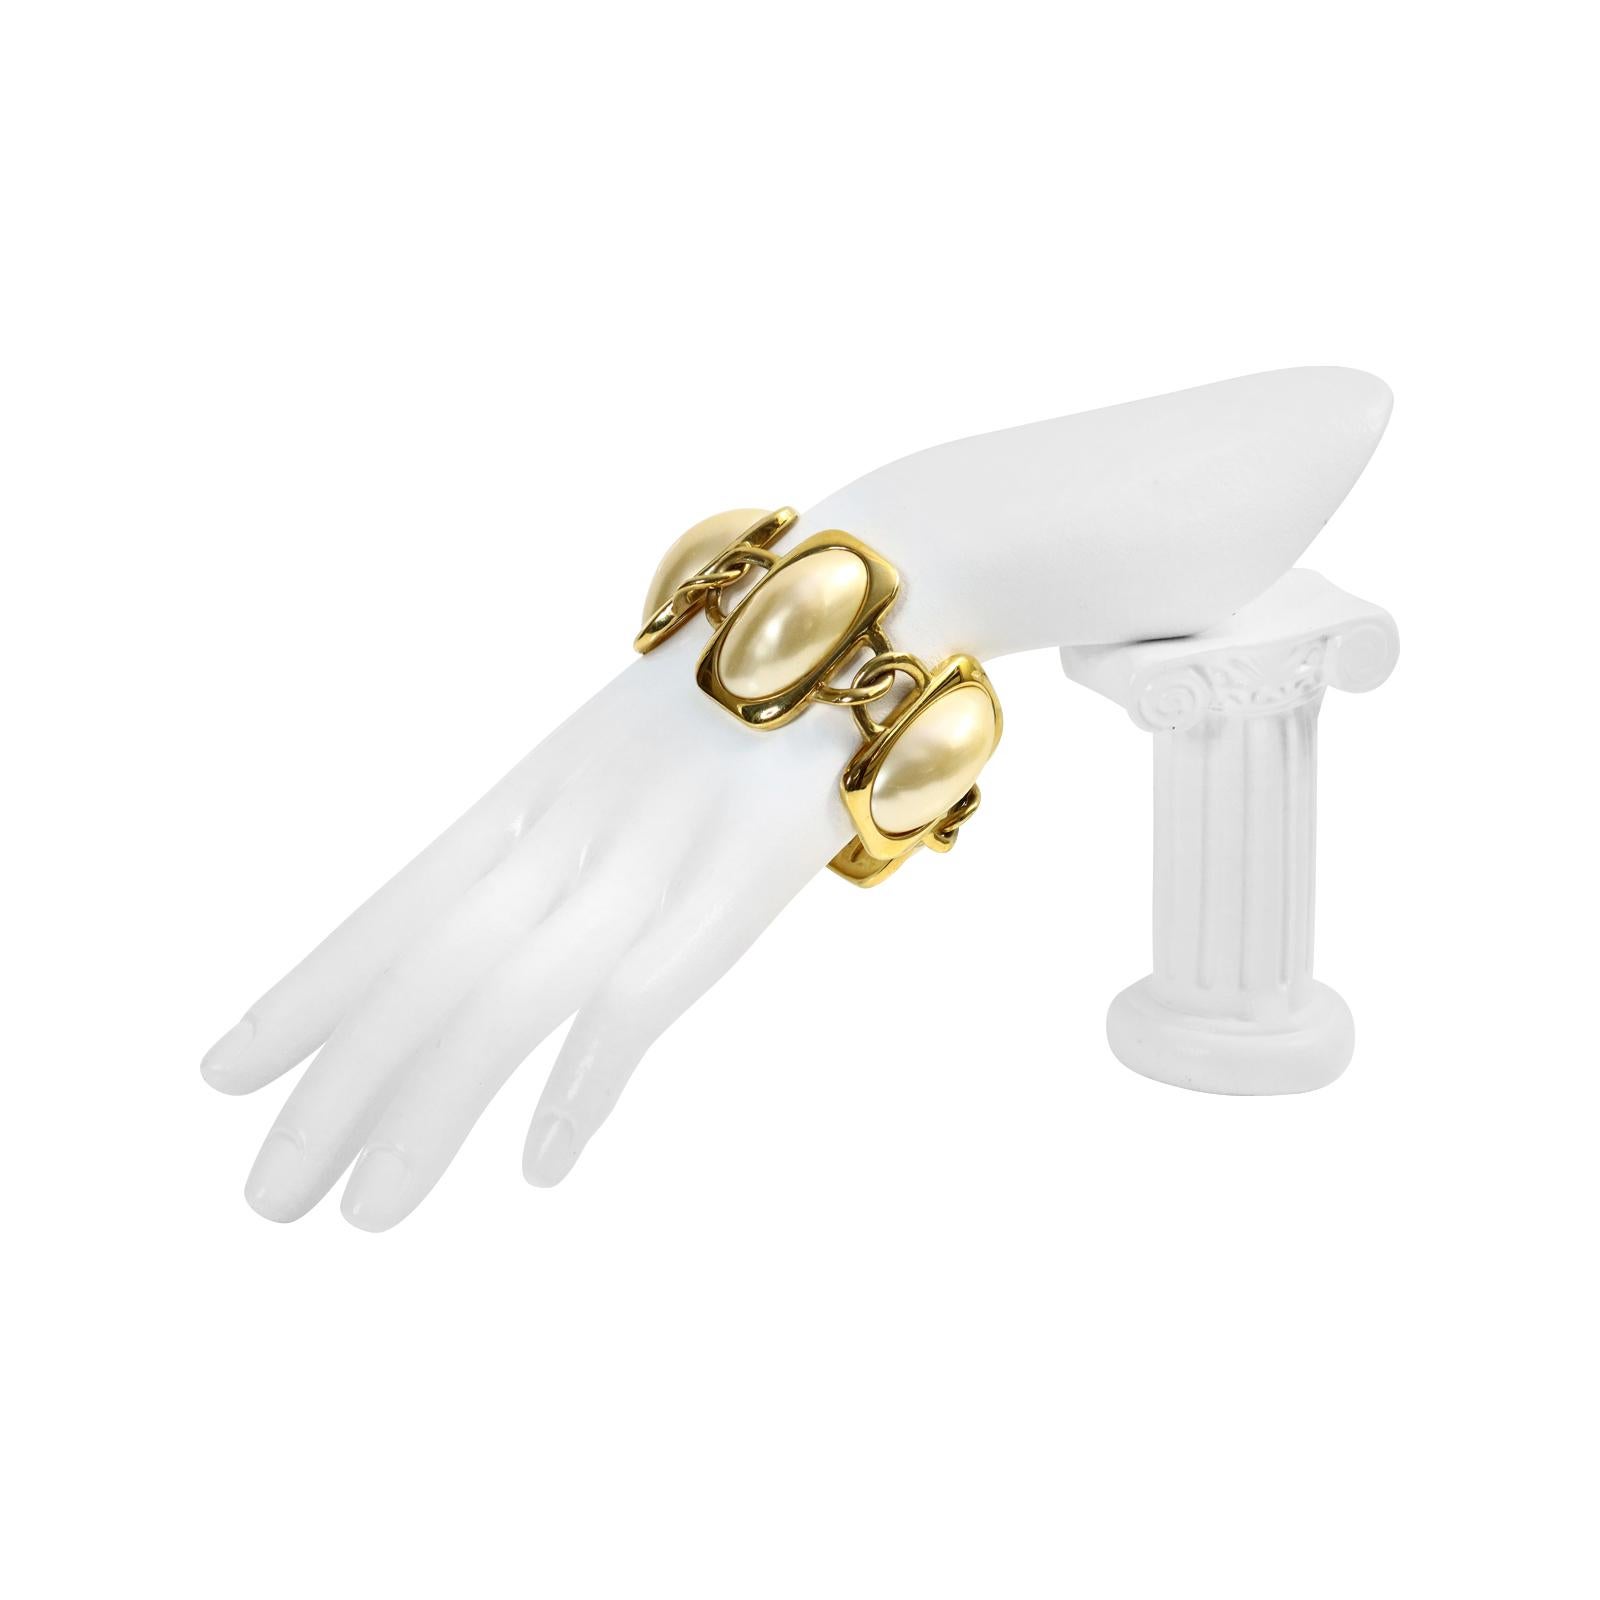 Vintage Trifari Gold Tone Large Faux Pearl Bracelet.  Such a Classic piece. Wear alone or mixed with others.  Always looks in style.  A Classic Pearl and gold bracelet alone or stacked up on your arm can make track pants with a white blouse and